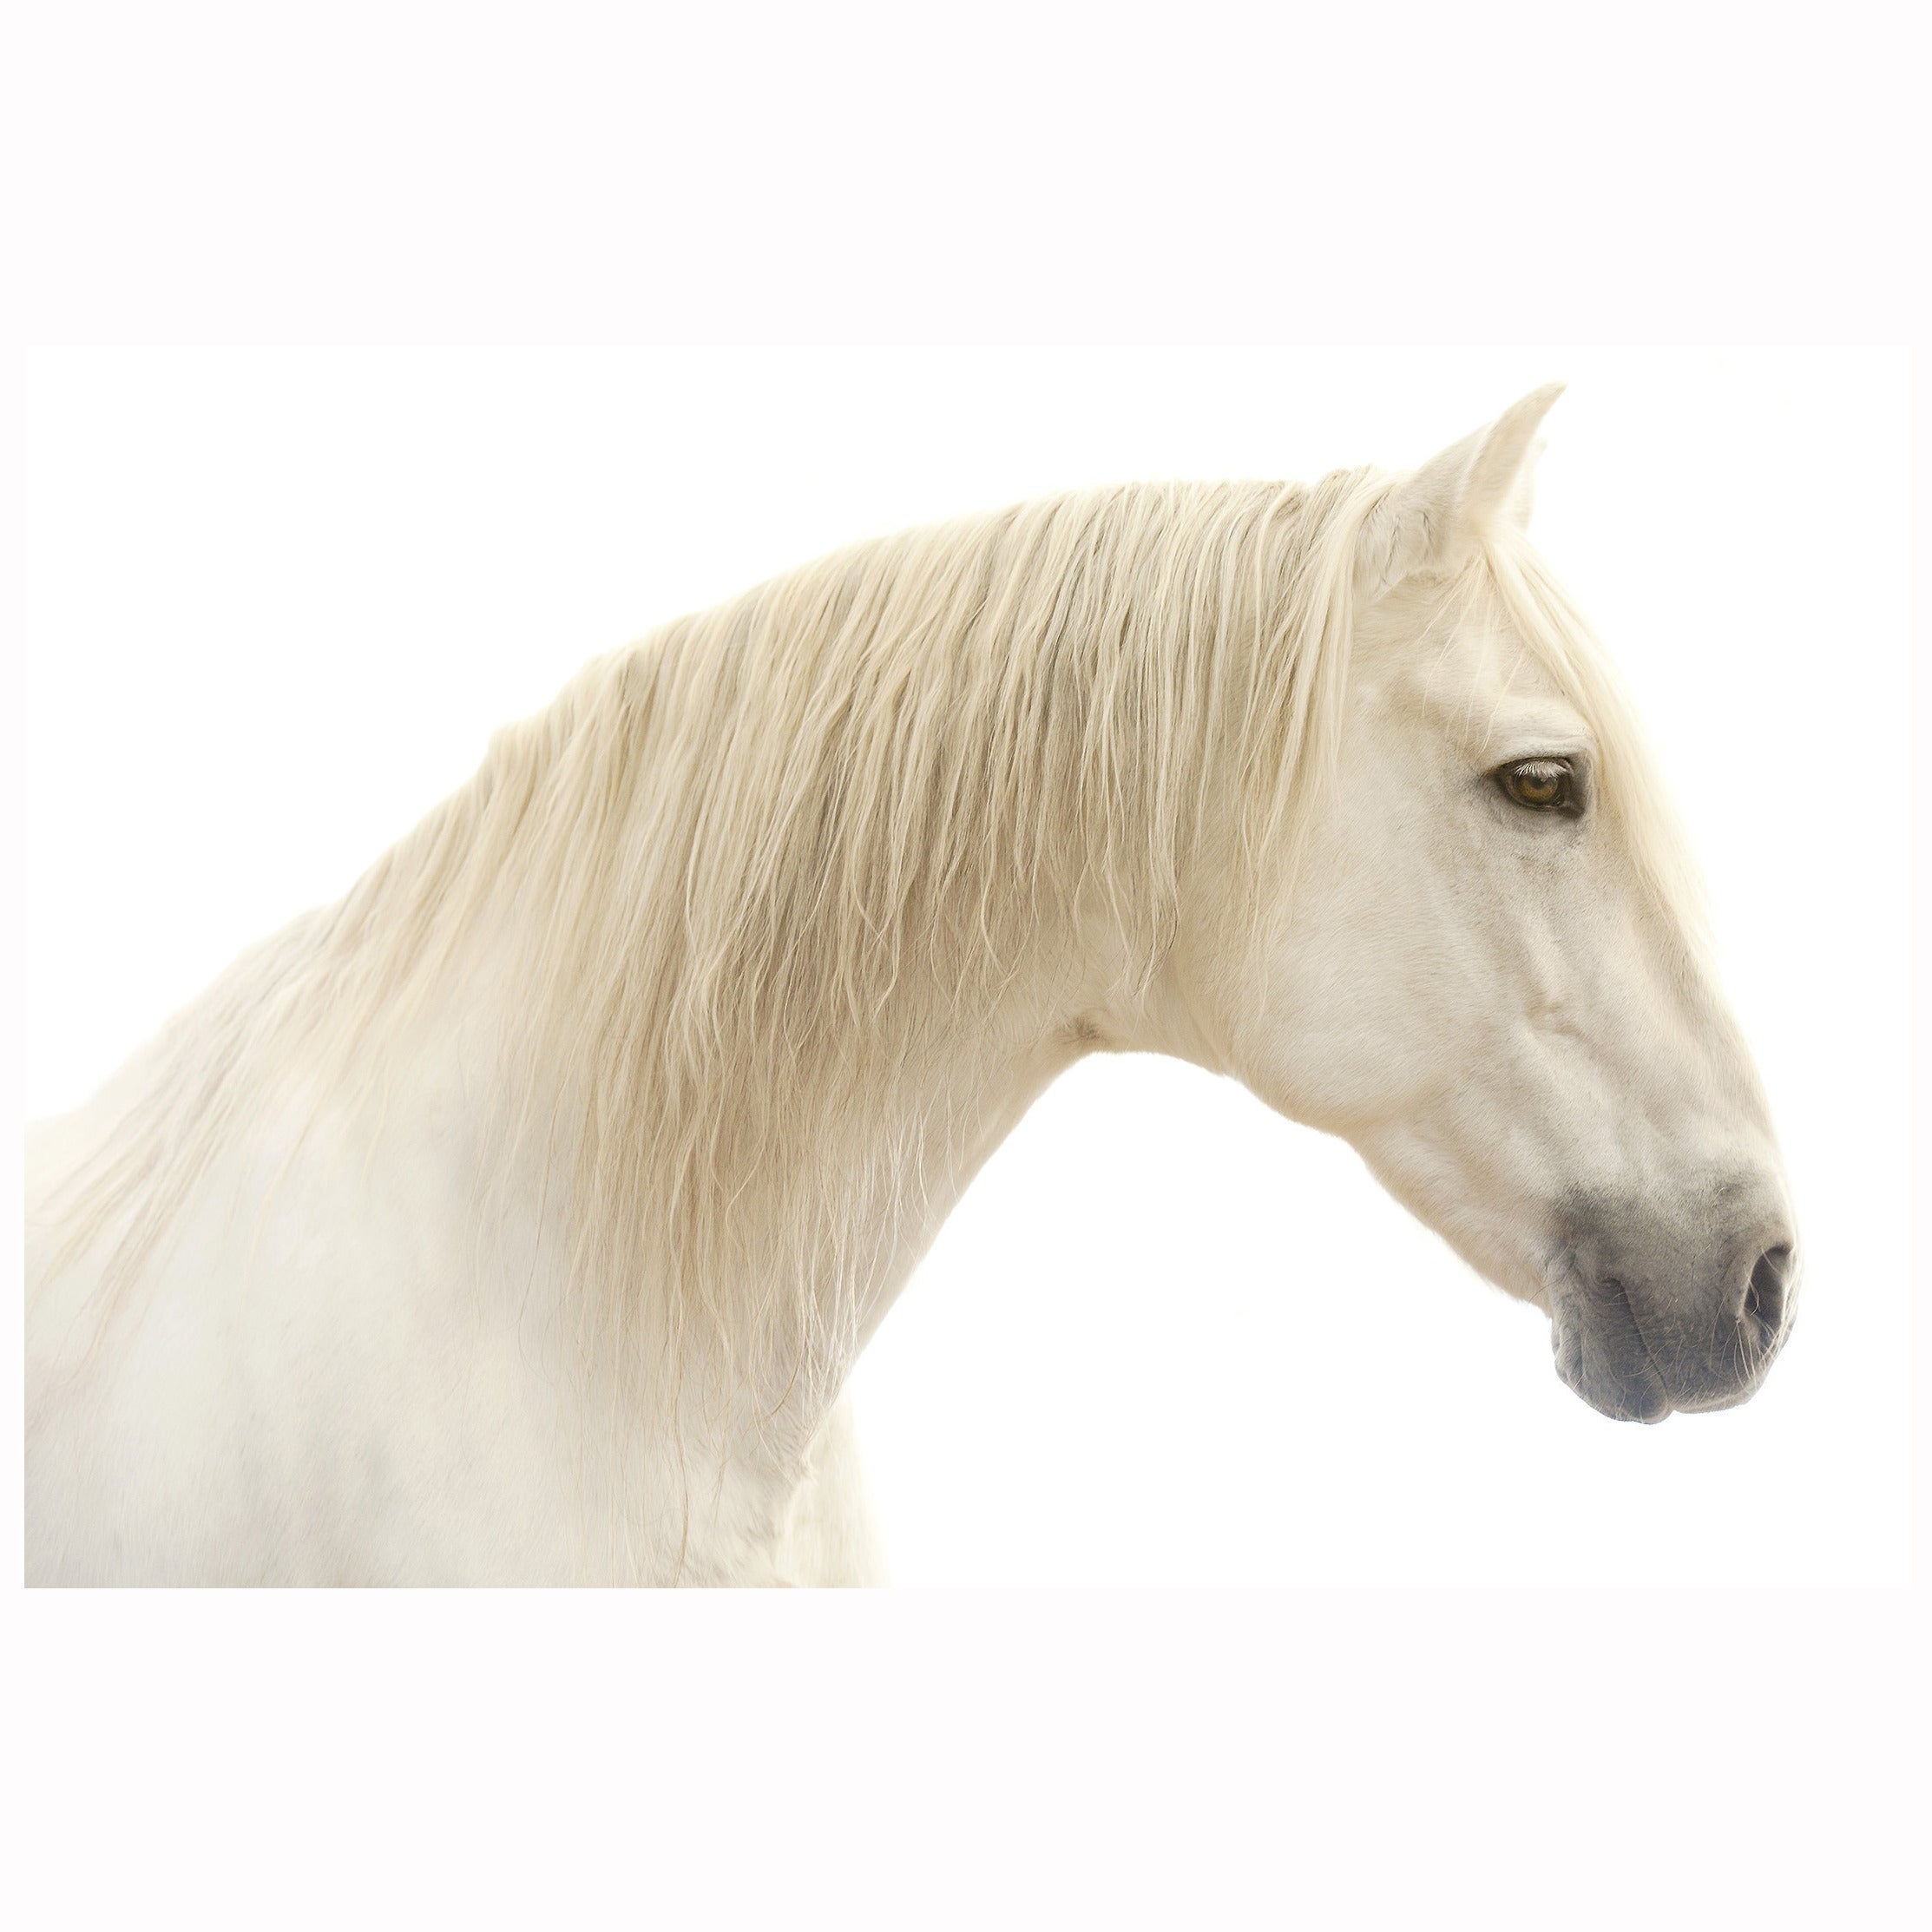 "Athansor," Horse Color White Framed Photograph by Lisa Houlgrave